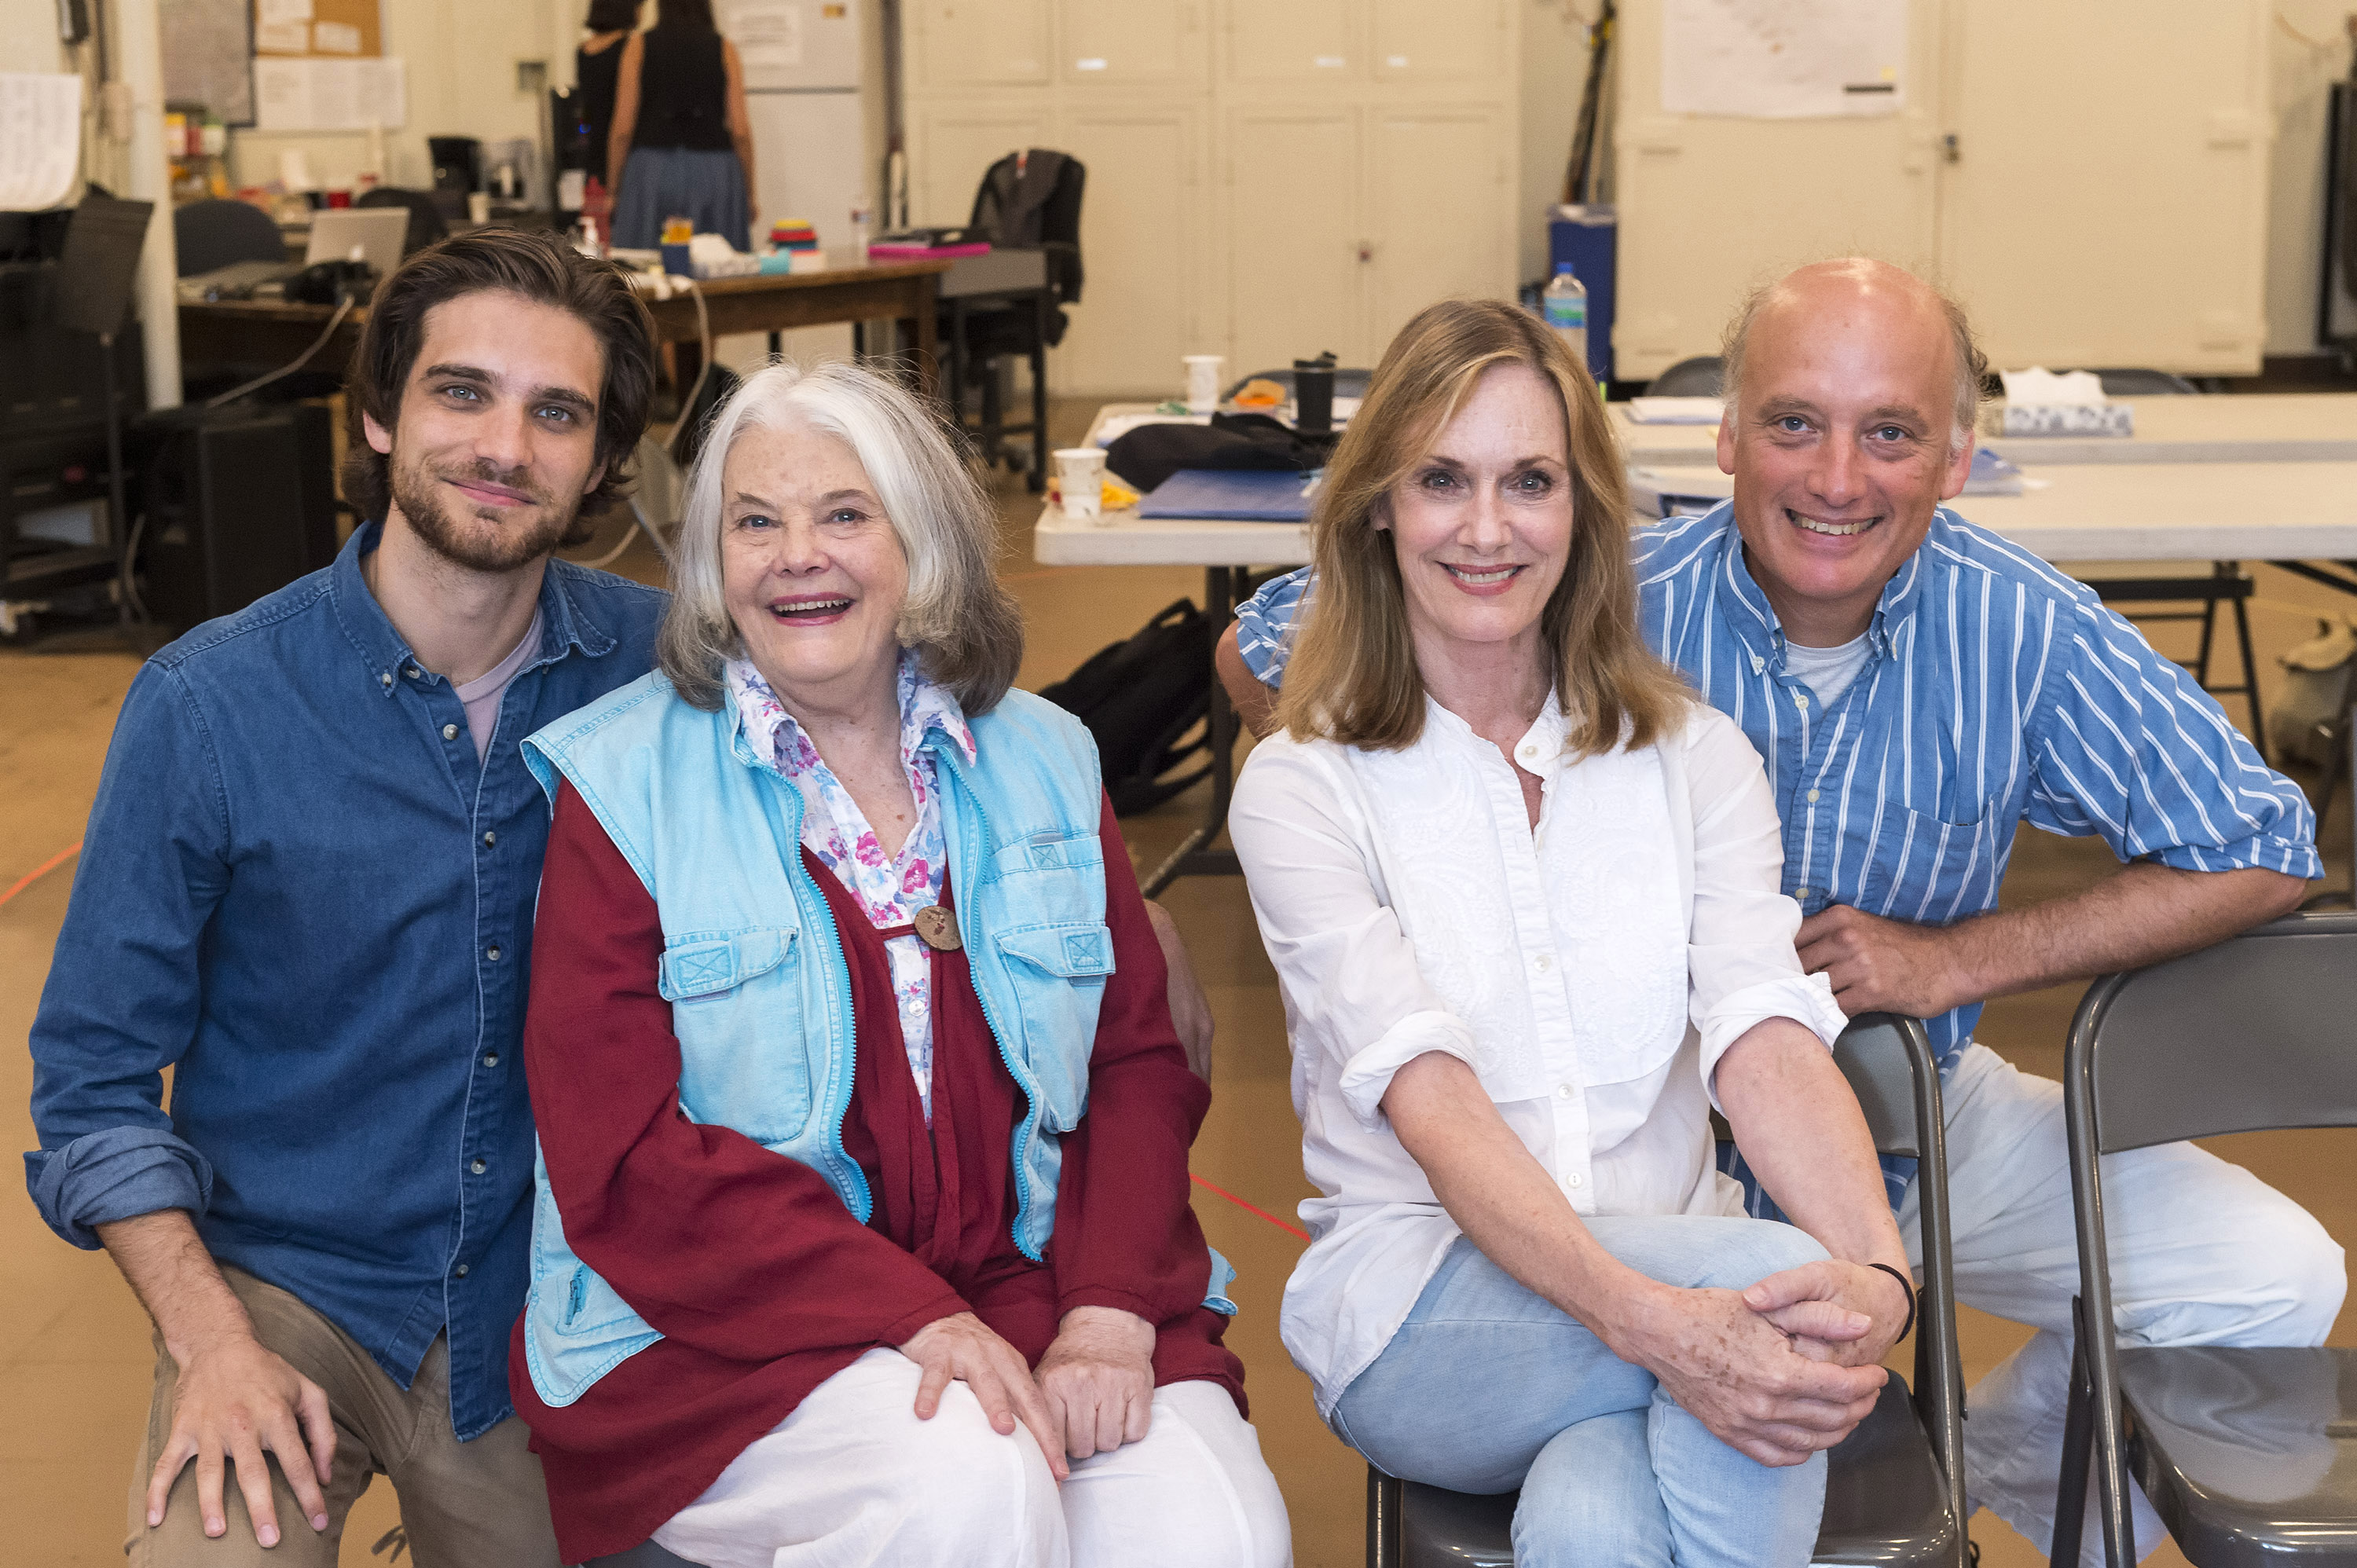 The cast of Marjorie Prime. Jeff Ward, Lois Smith, Lisa Emery and Frank Wood.